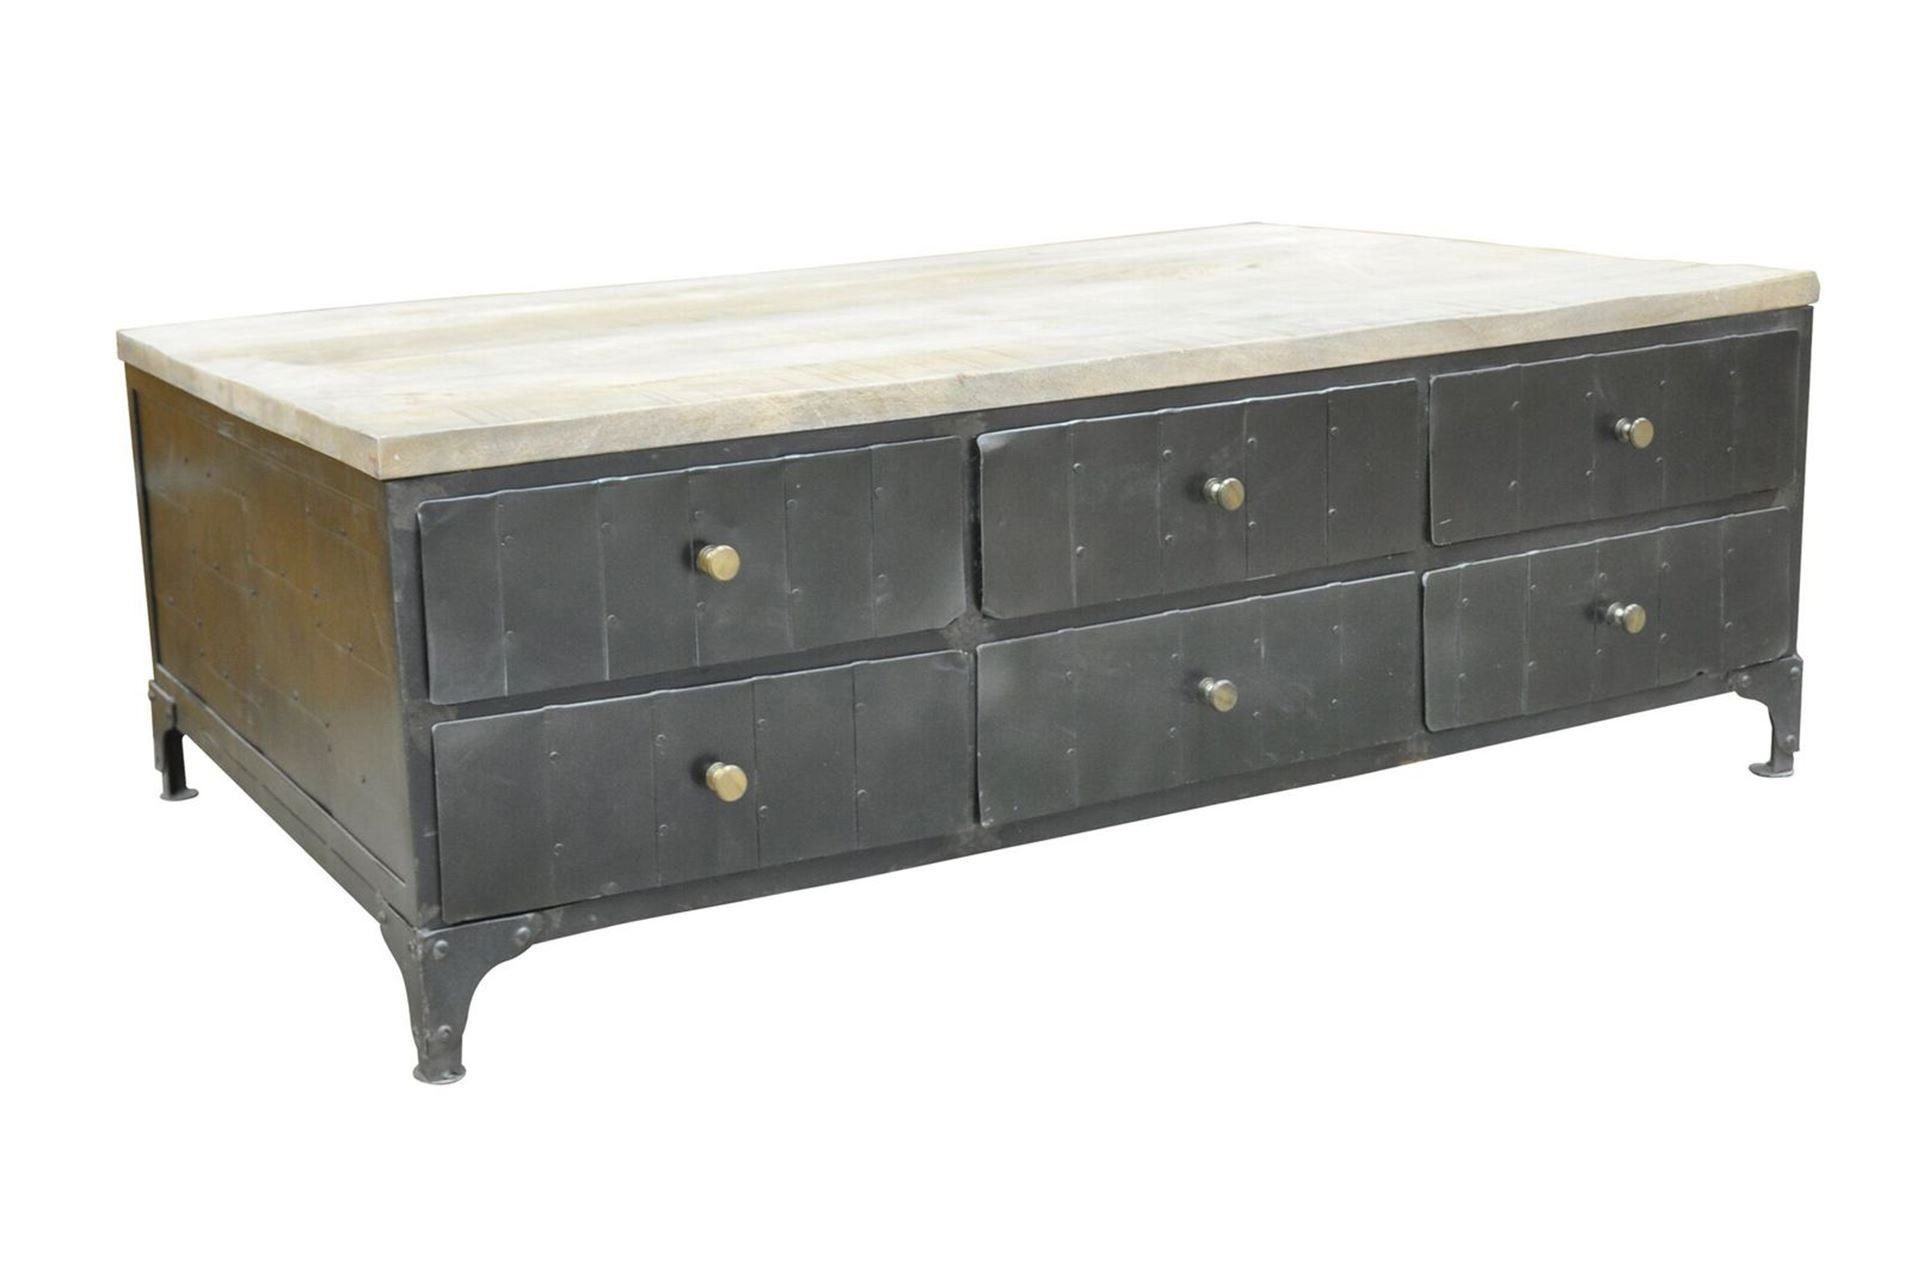 Living Spaces Coffee Table
 Otb Grey Wash Finish 6 Drawer Coffee Table Living Spaces